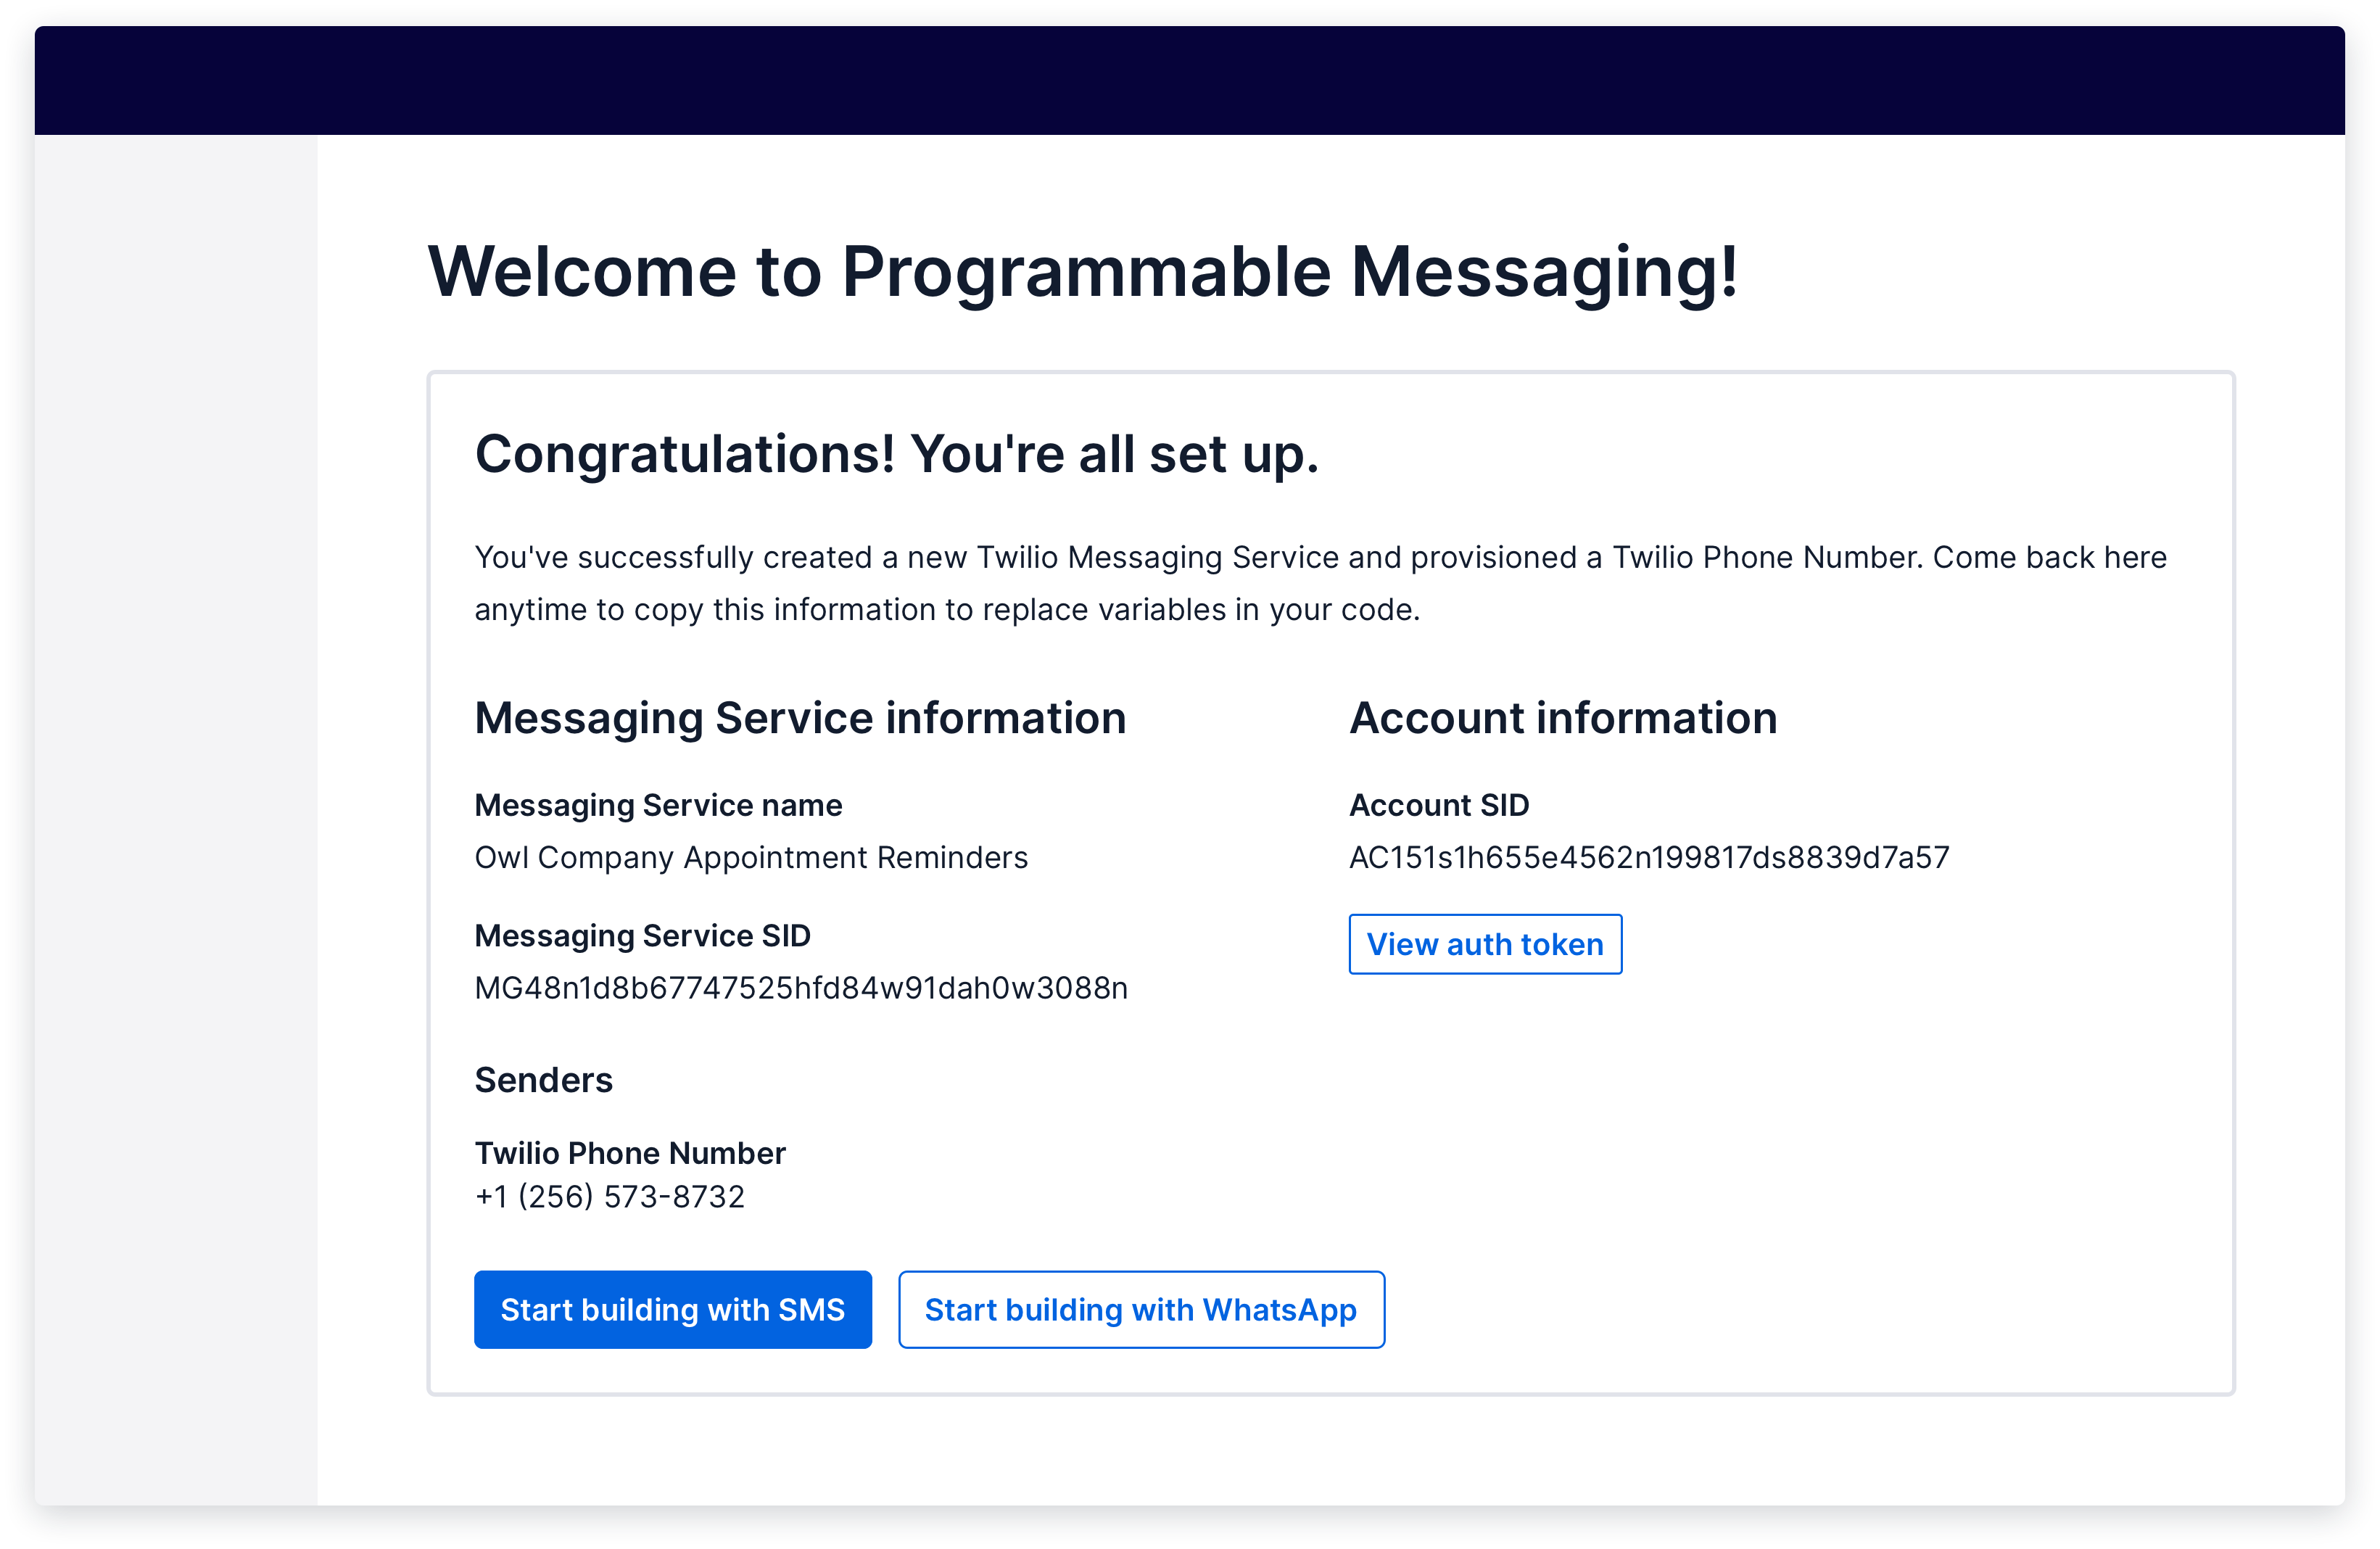 Full-page congratulations message on setting up a Twilio Messaging Service with SIDs to copy